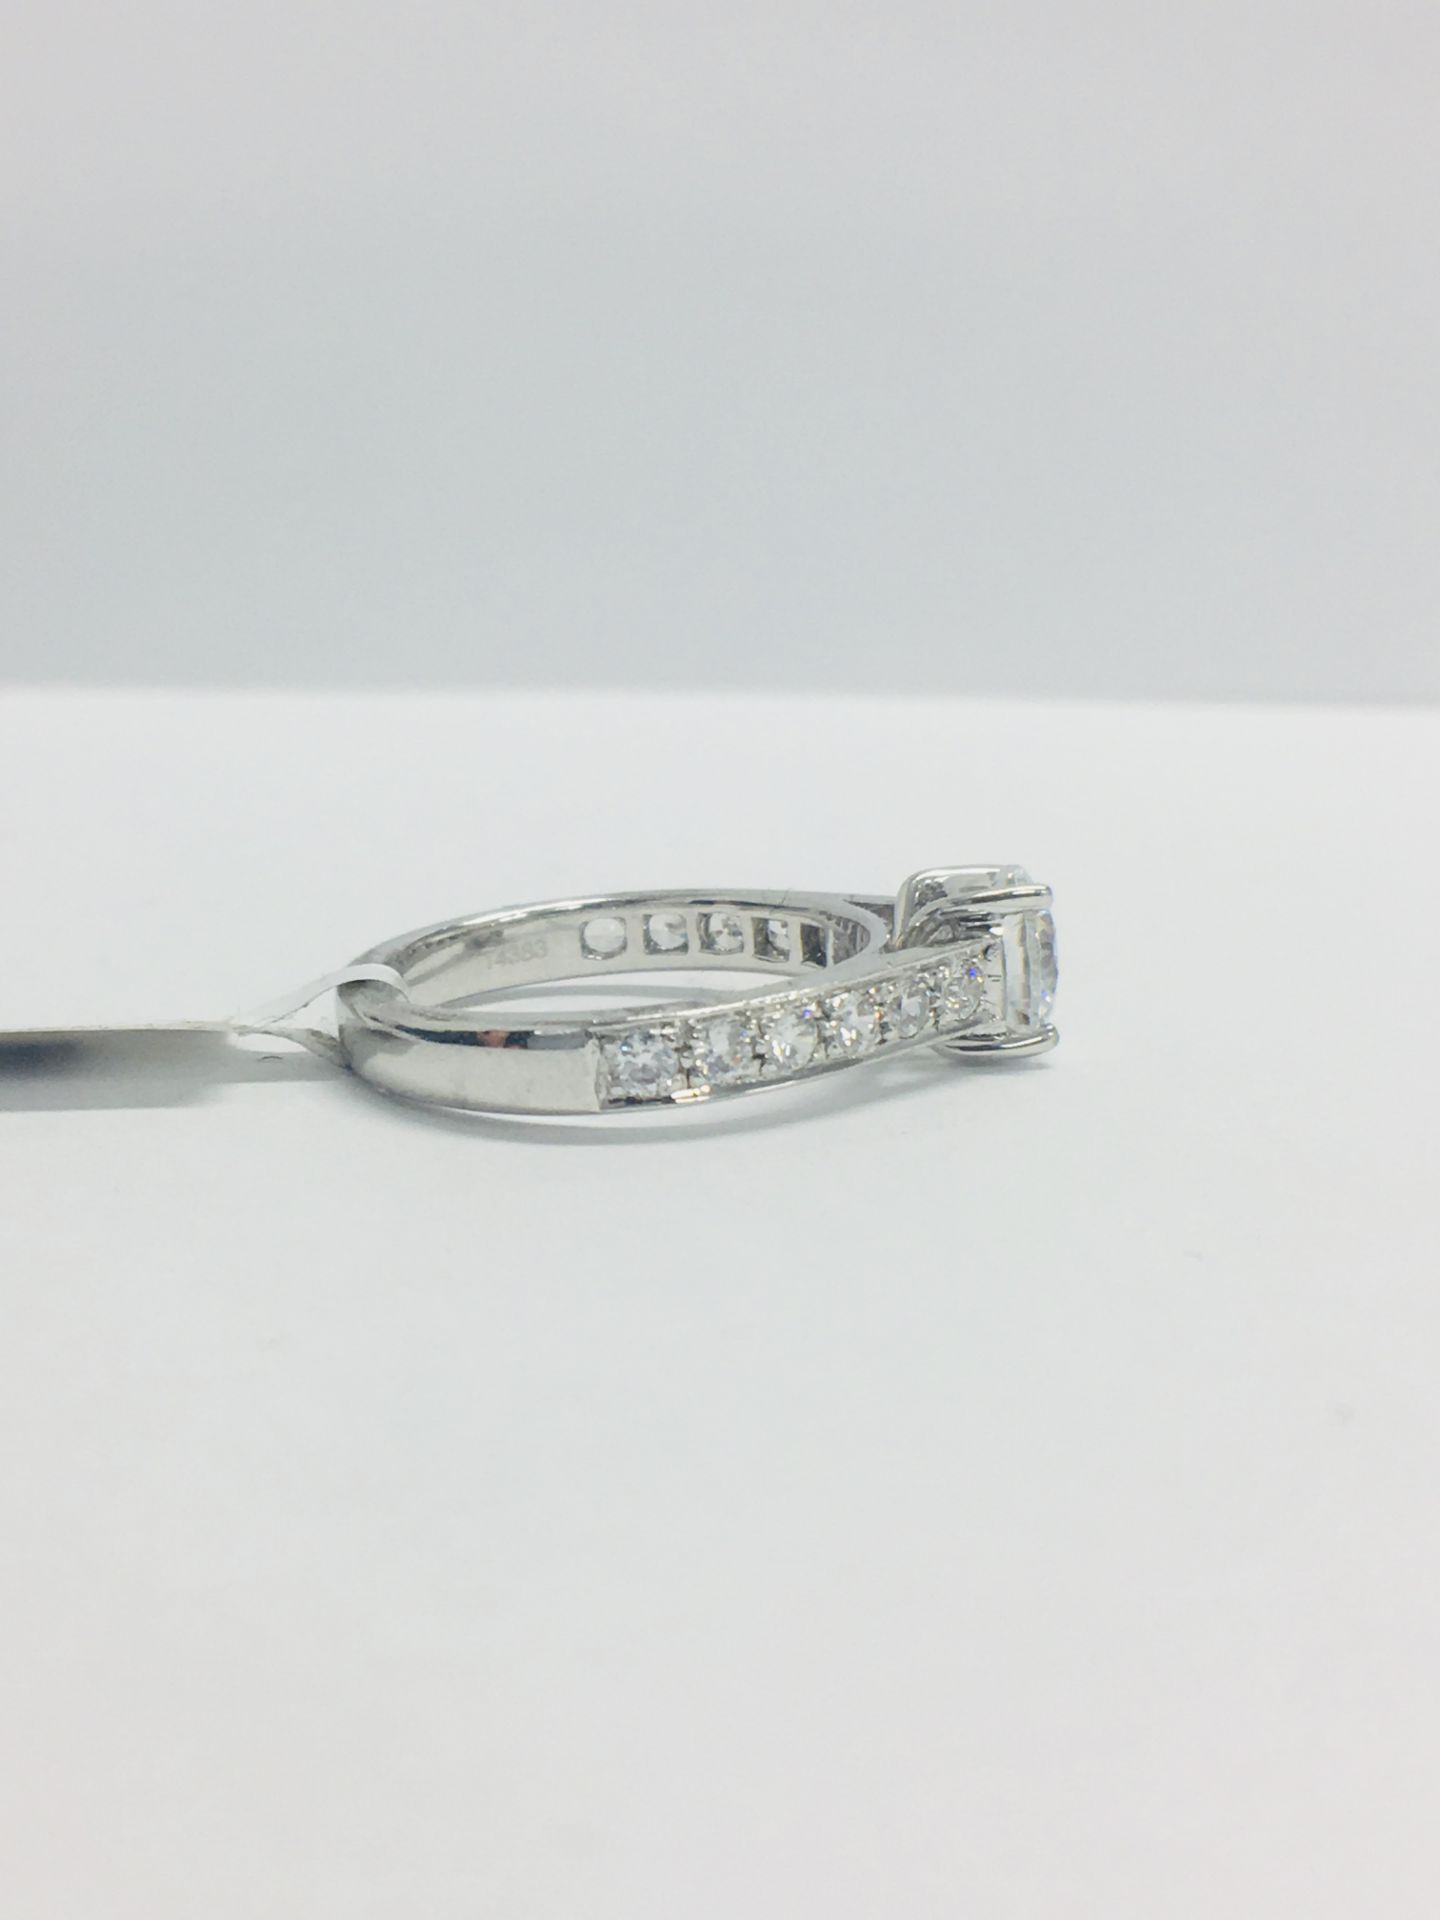 Platinum Diamond Solitaire Ring With Diamond Set Shoulders - Image 10 of 11